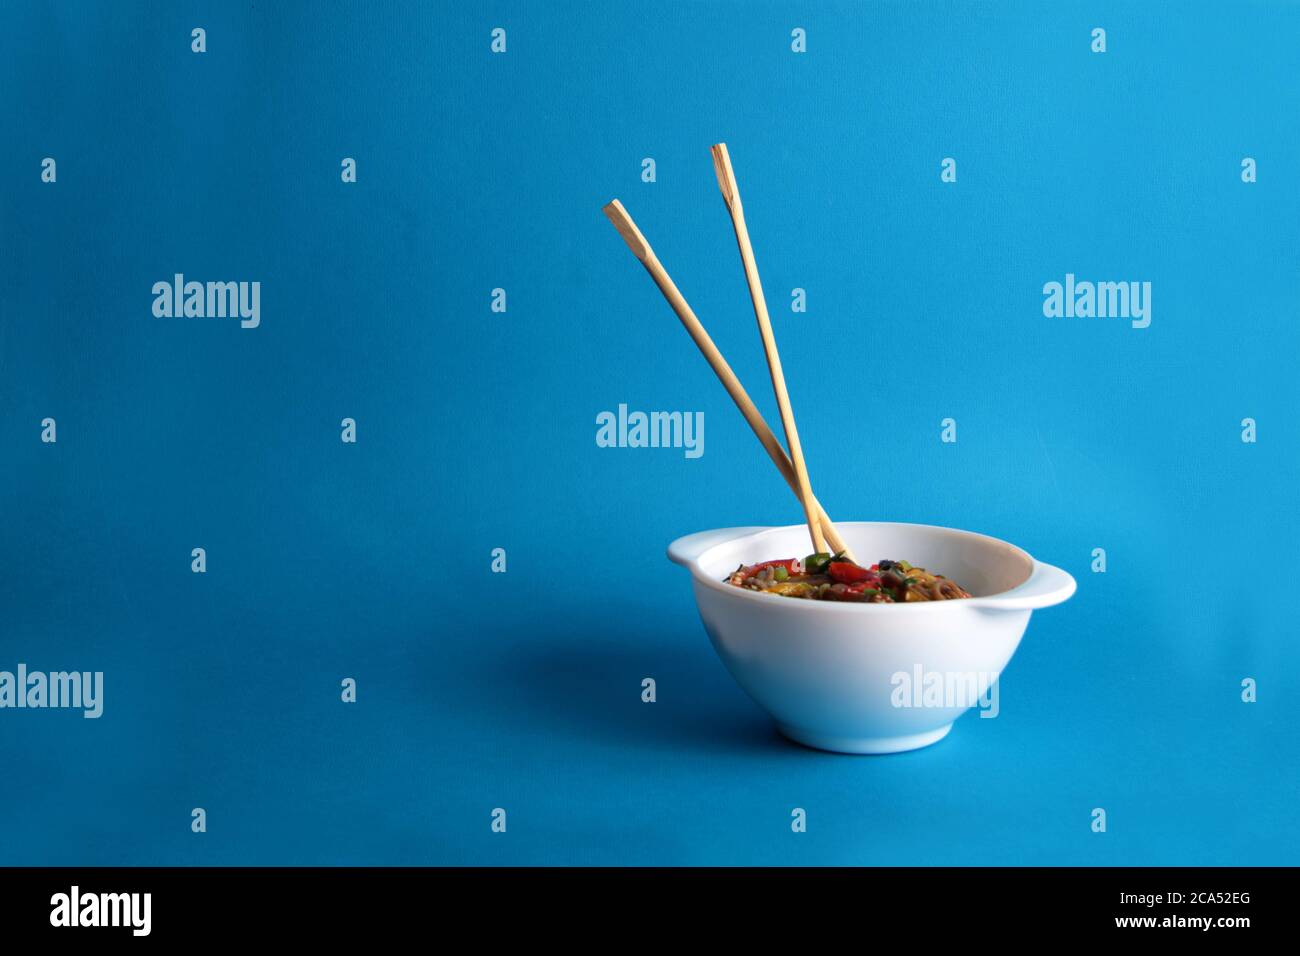 a bowl of wok noodles and chopsticks isolated on blue background. Image contains copy space Stock Photo